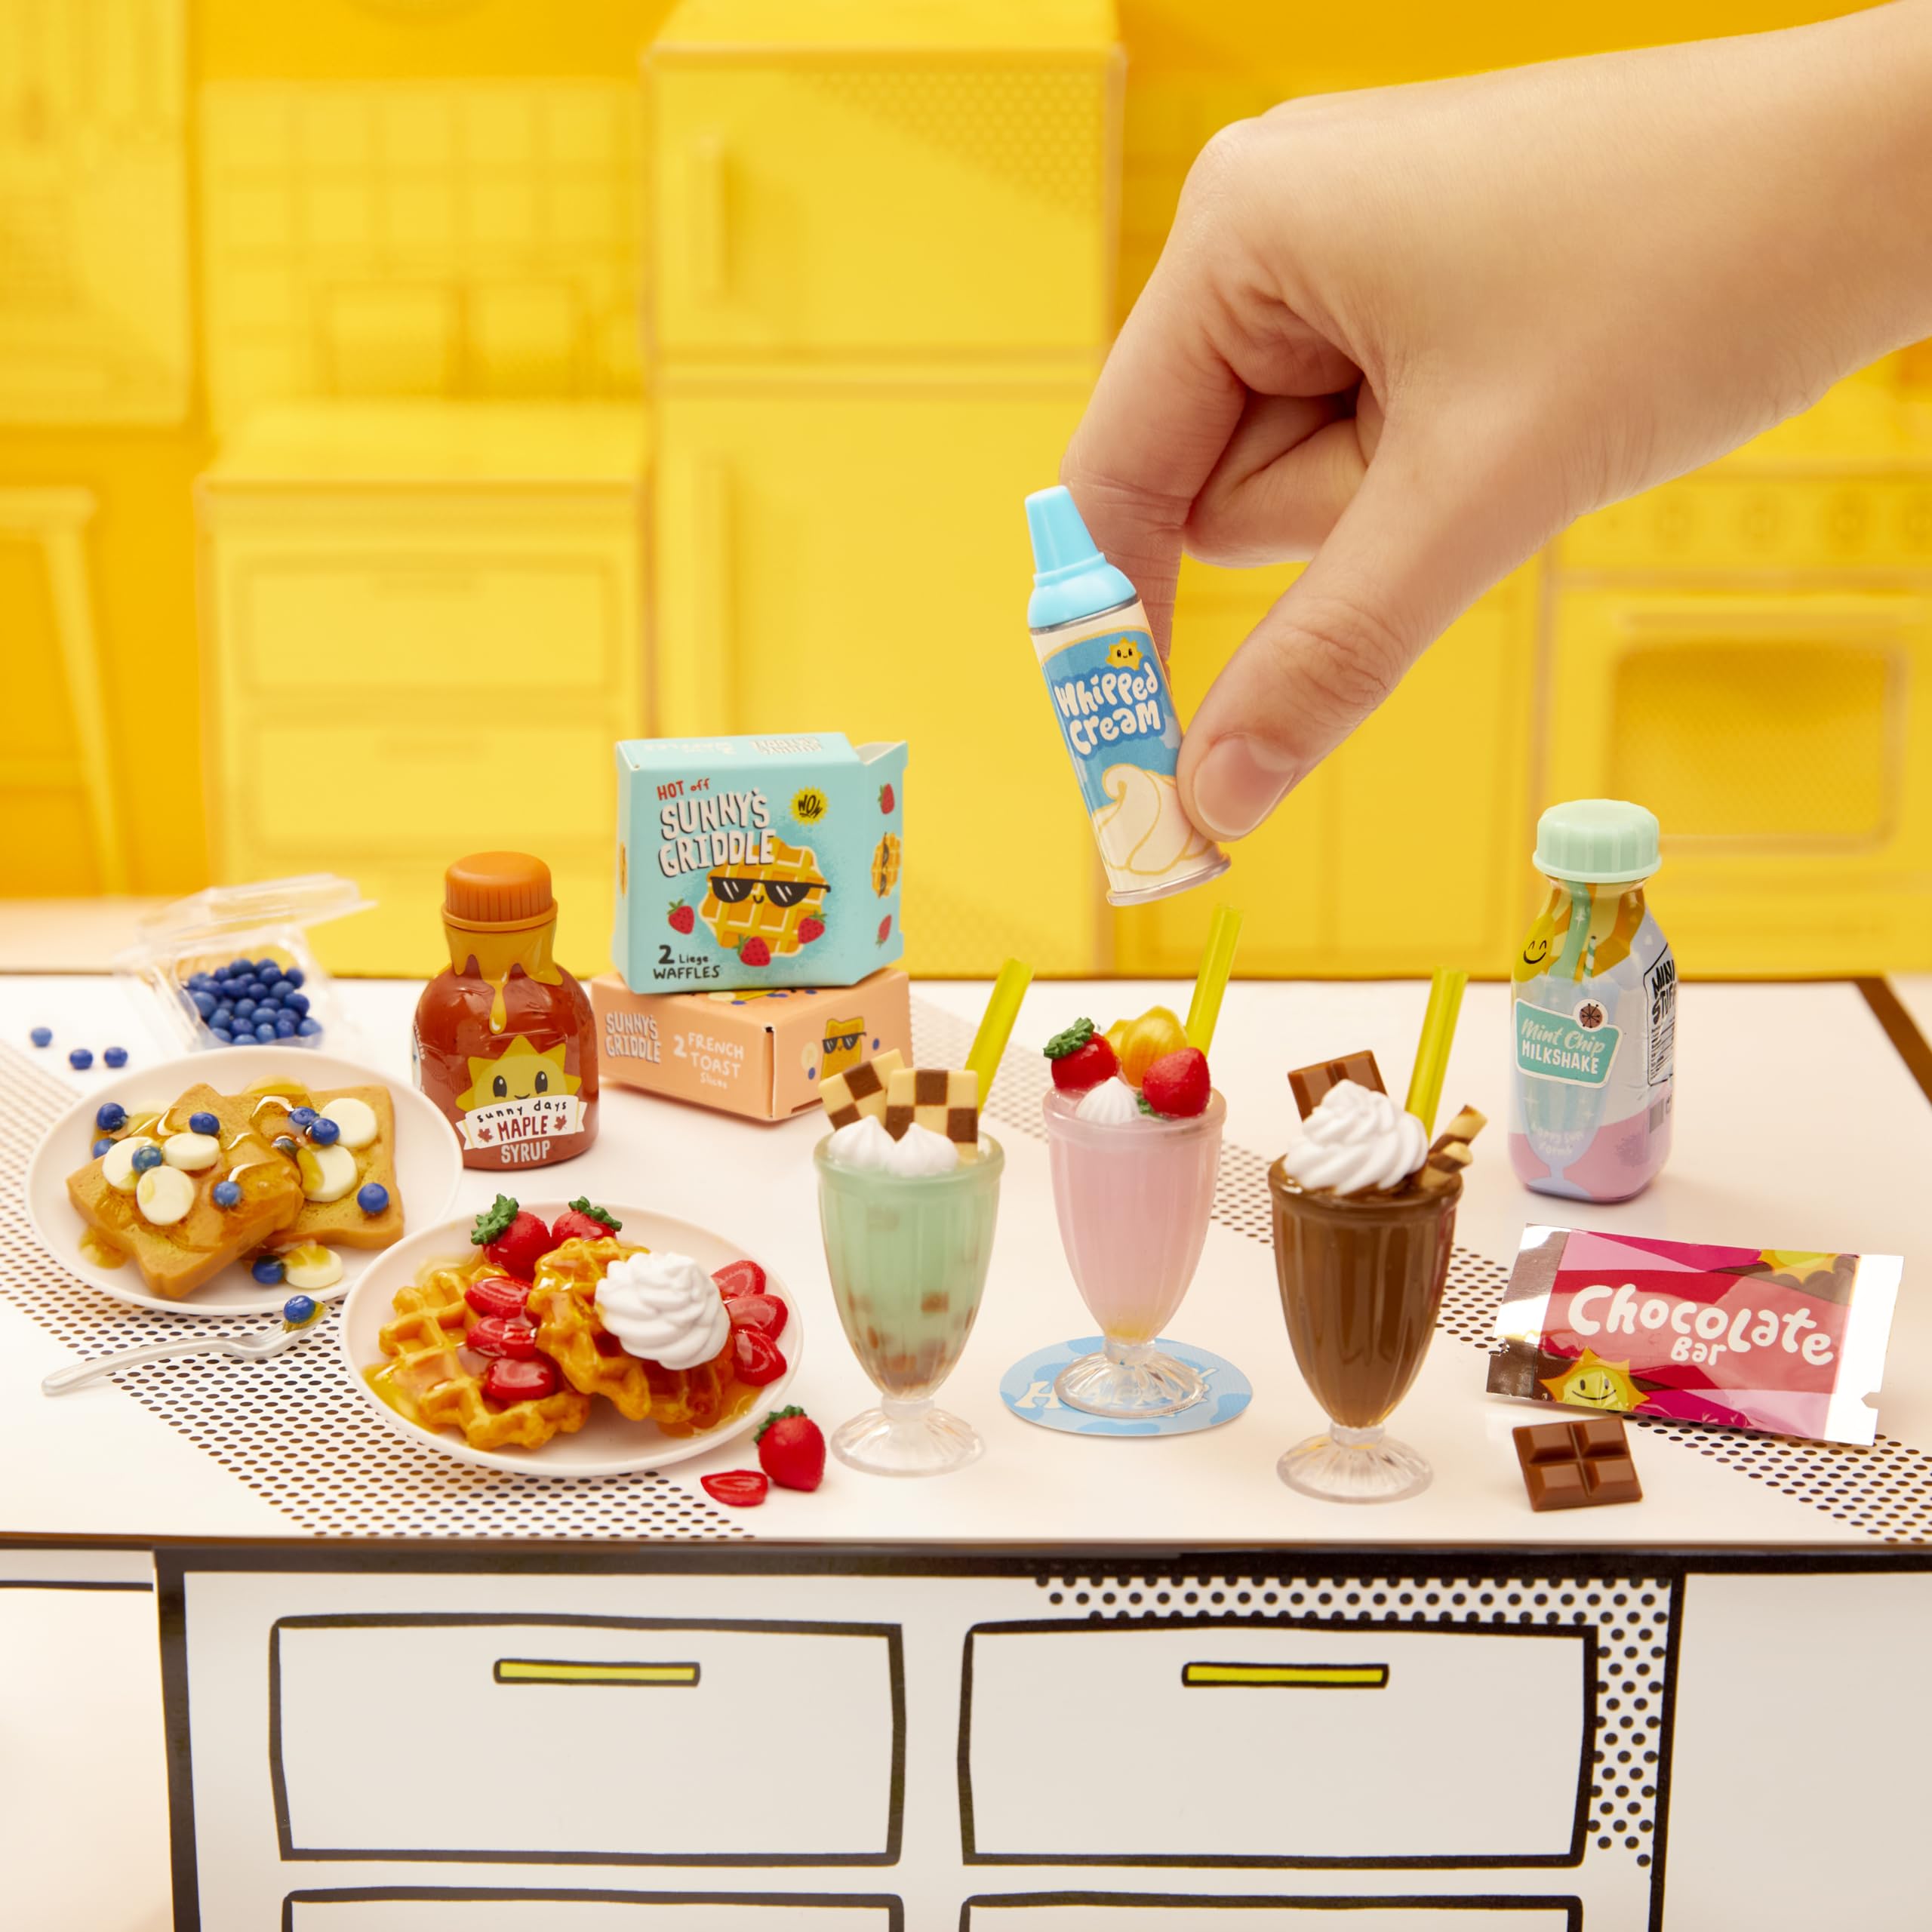 MGA's Miniverse Make It Mini Food Diner Series 1 Ice Cream Shop Bundle (3 Pack) Mini Collectibles, Blind Packaging, DIY, Resin Play, Replica Food, NOT Edible, Collectors, 8+